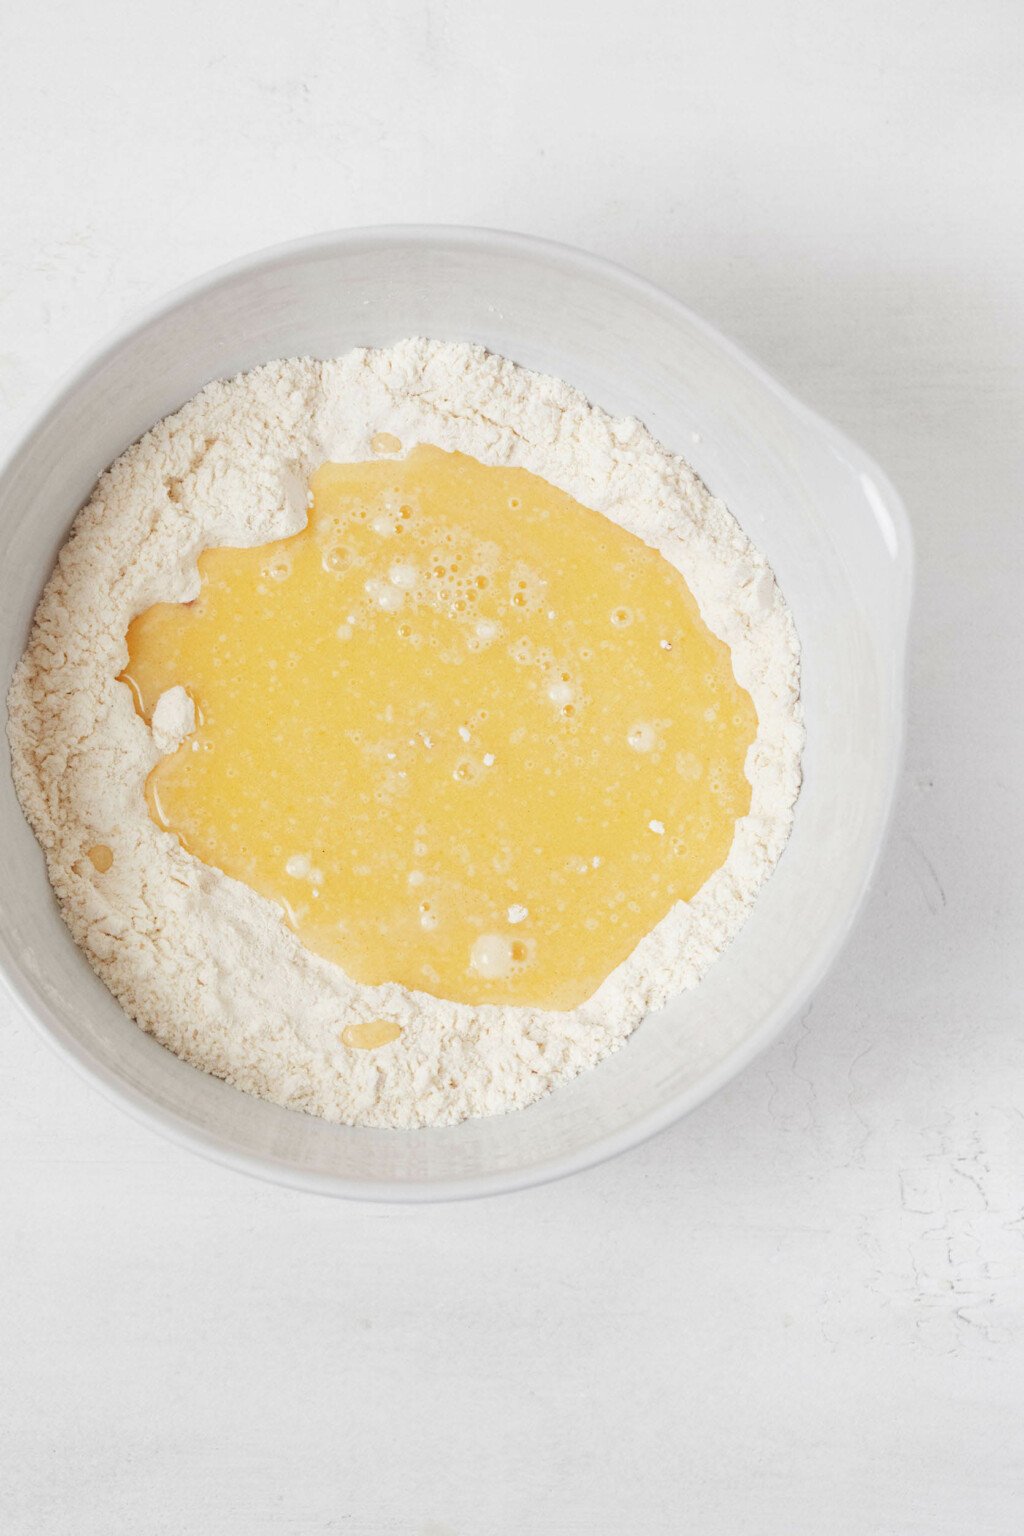 A muffin batter is being mixed in a large, white mixing bowl.